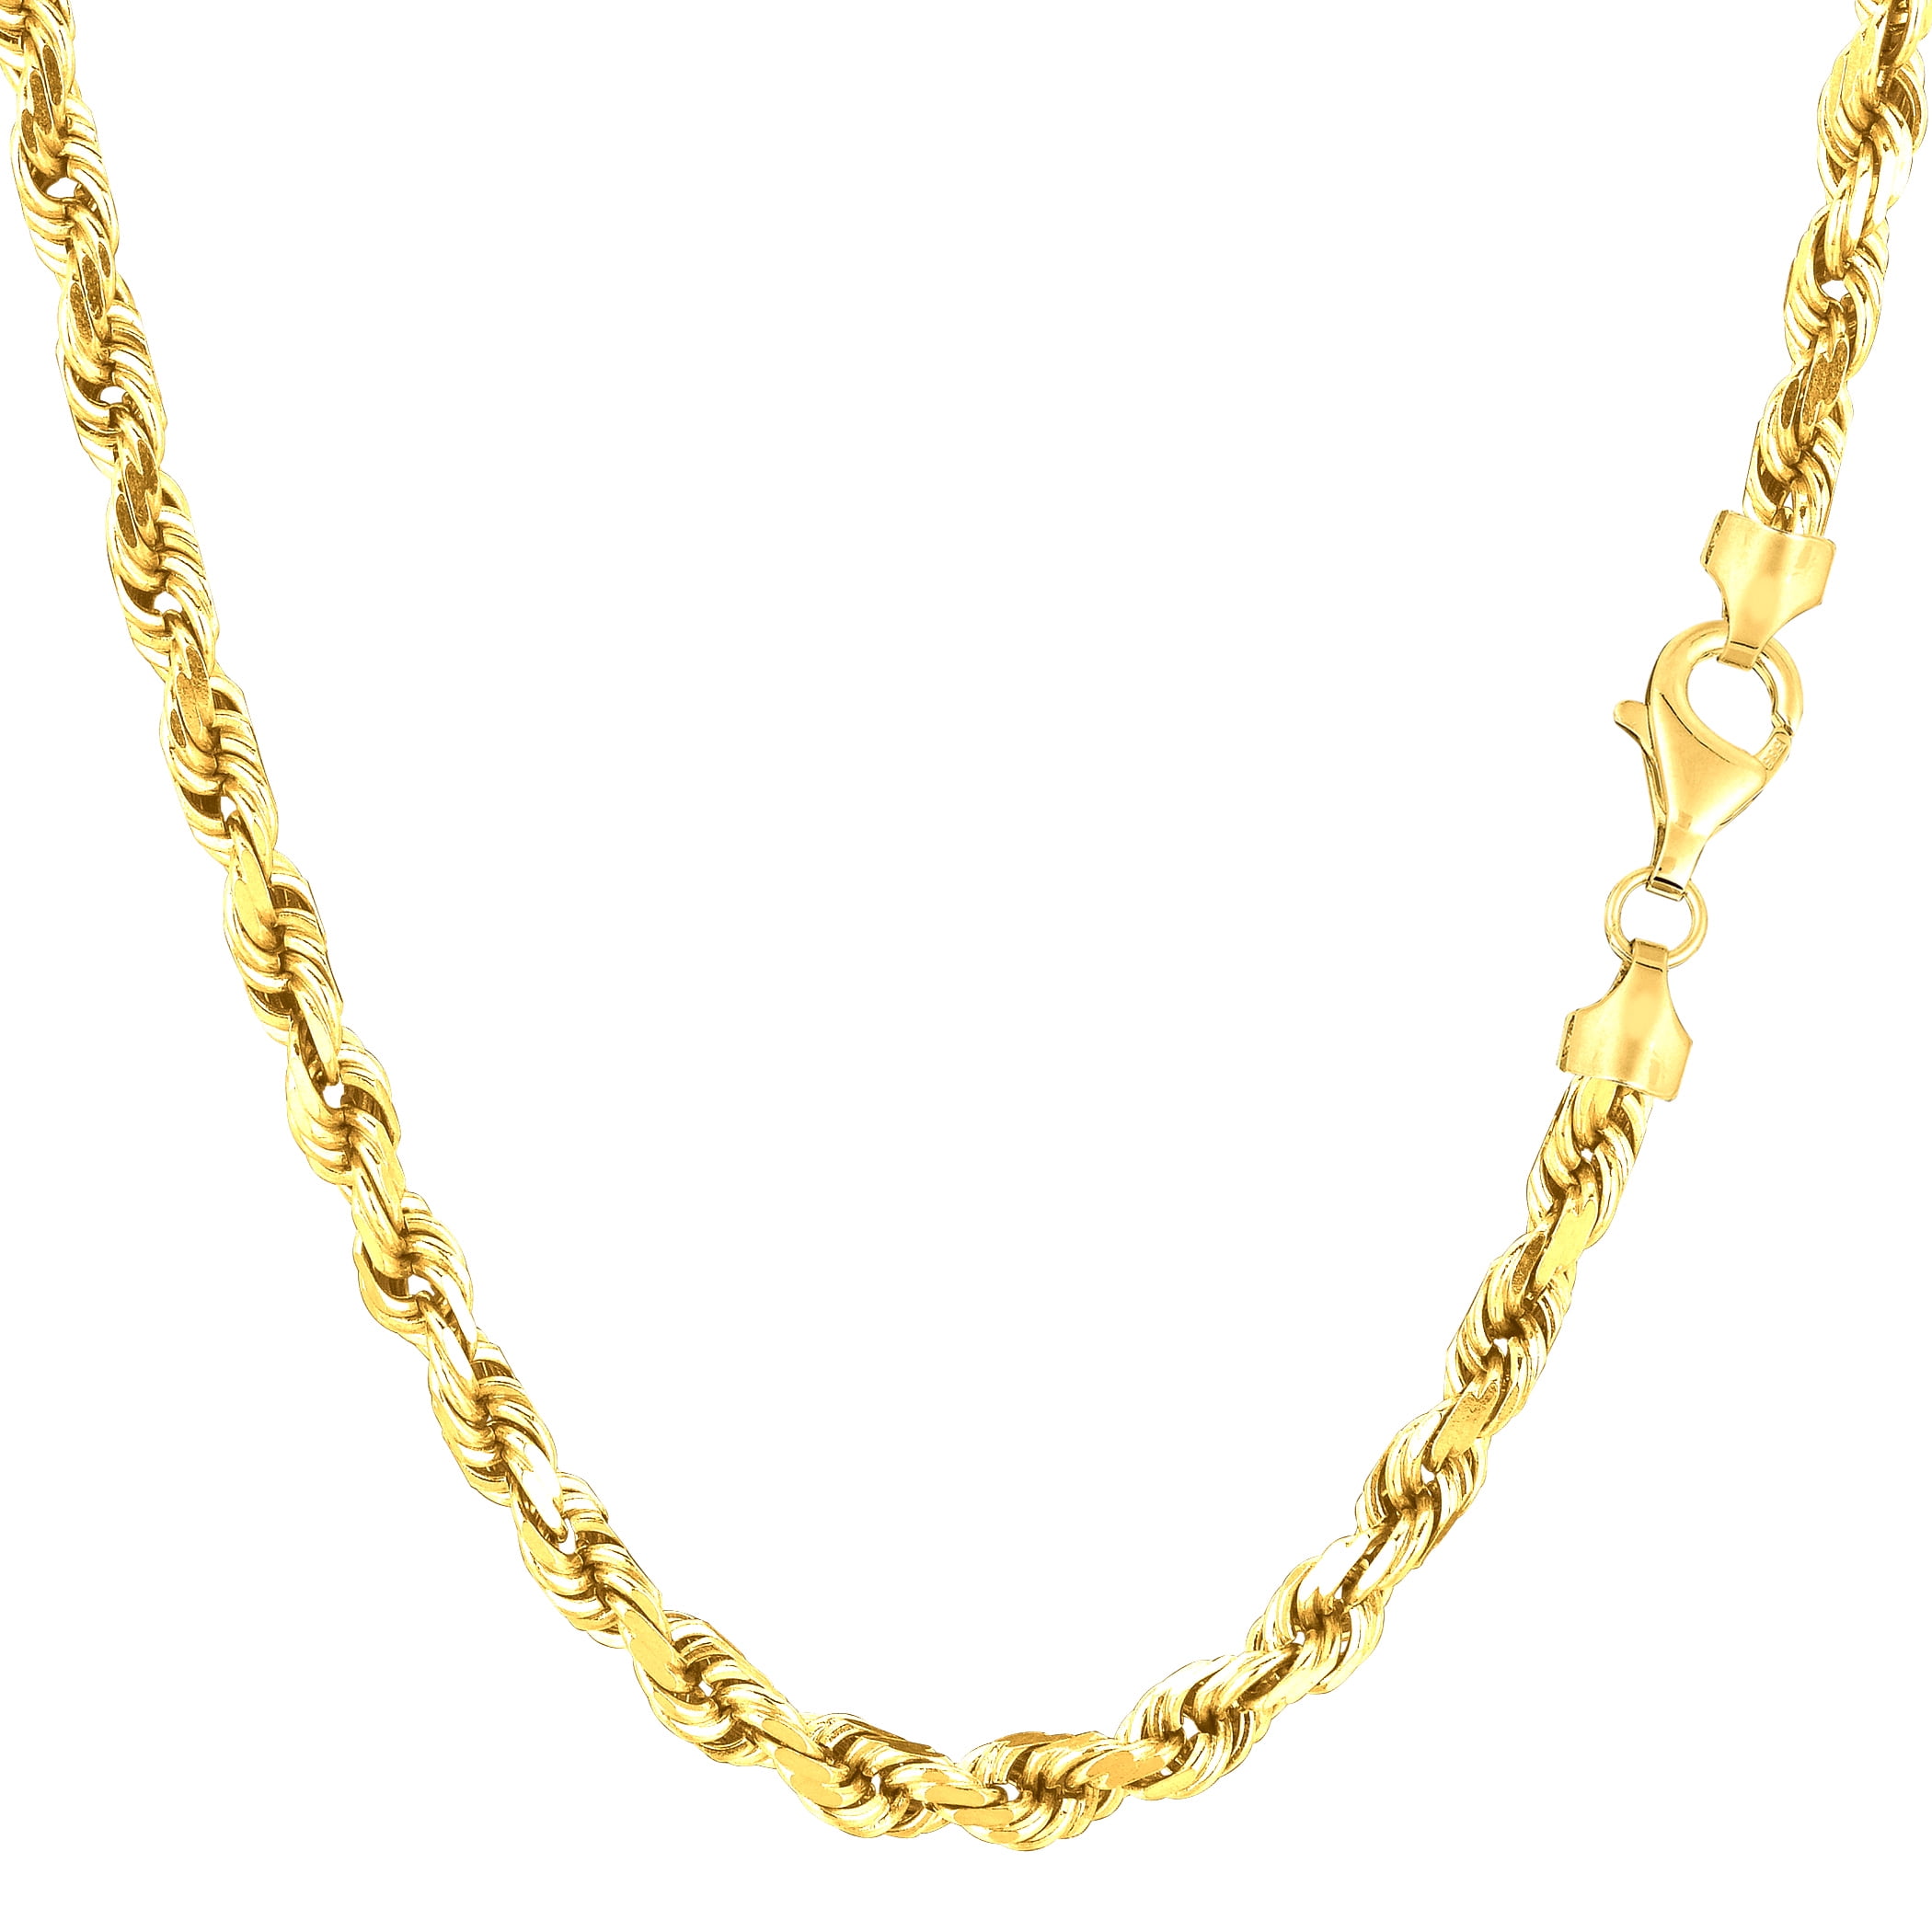 14K Yellow Gold Filled Solid Figaro Chain Bracelet, 4.0 mm, 8.5